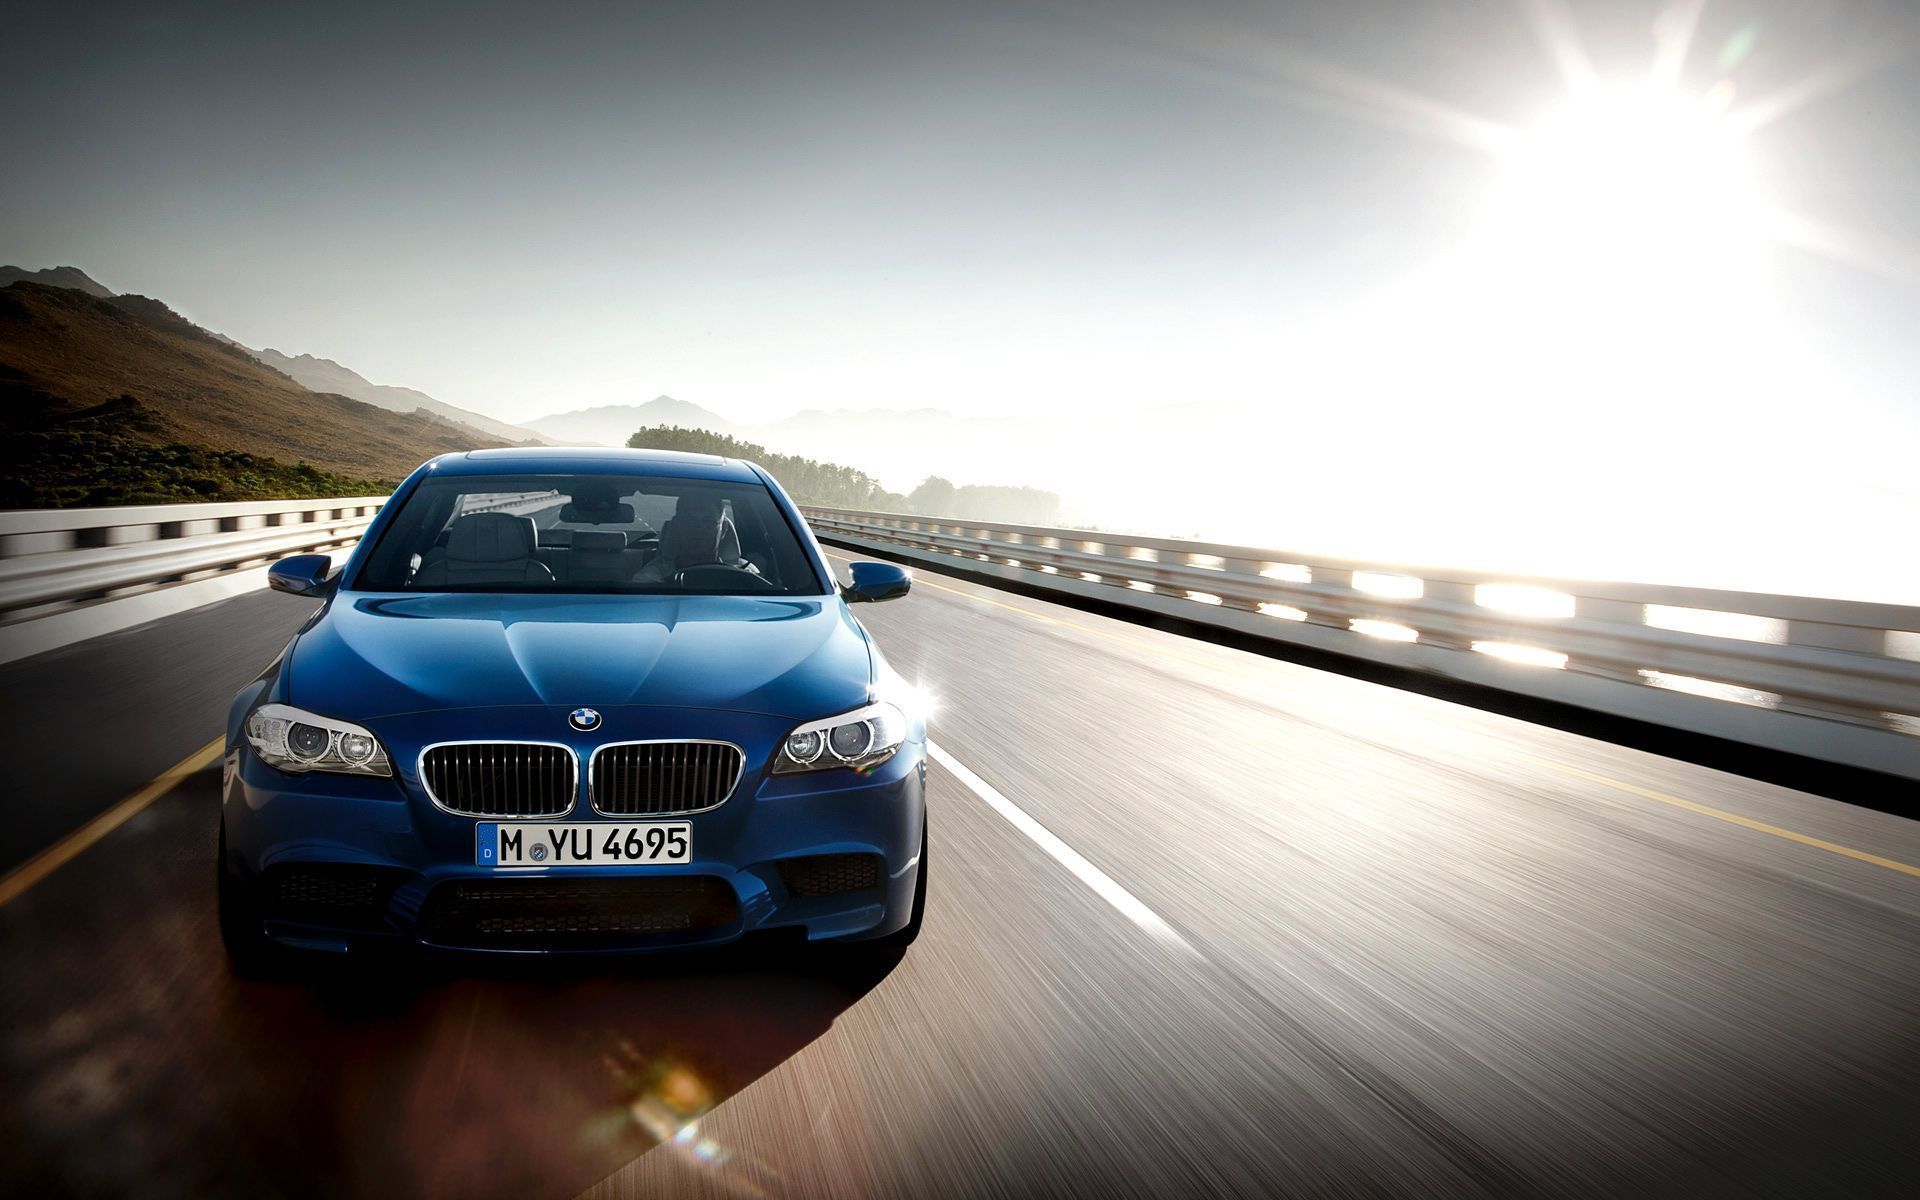 your-batch-of-bmw-m5-lci-wallpapers-is-here-79705_1.jpg